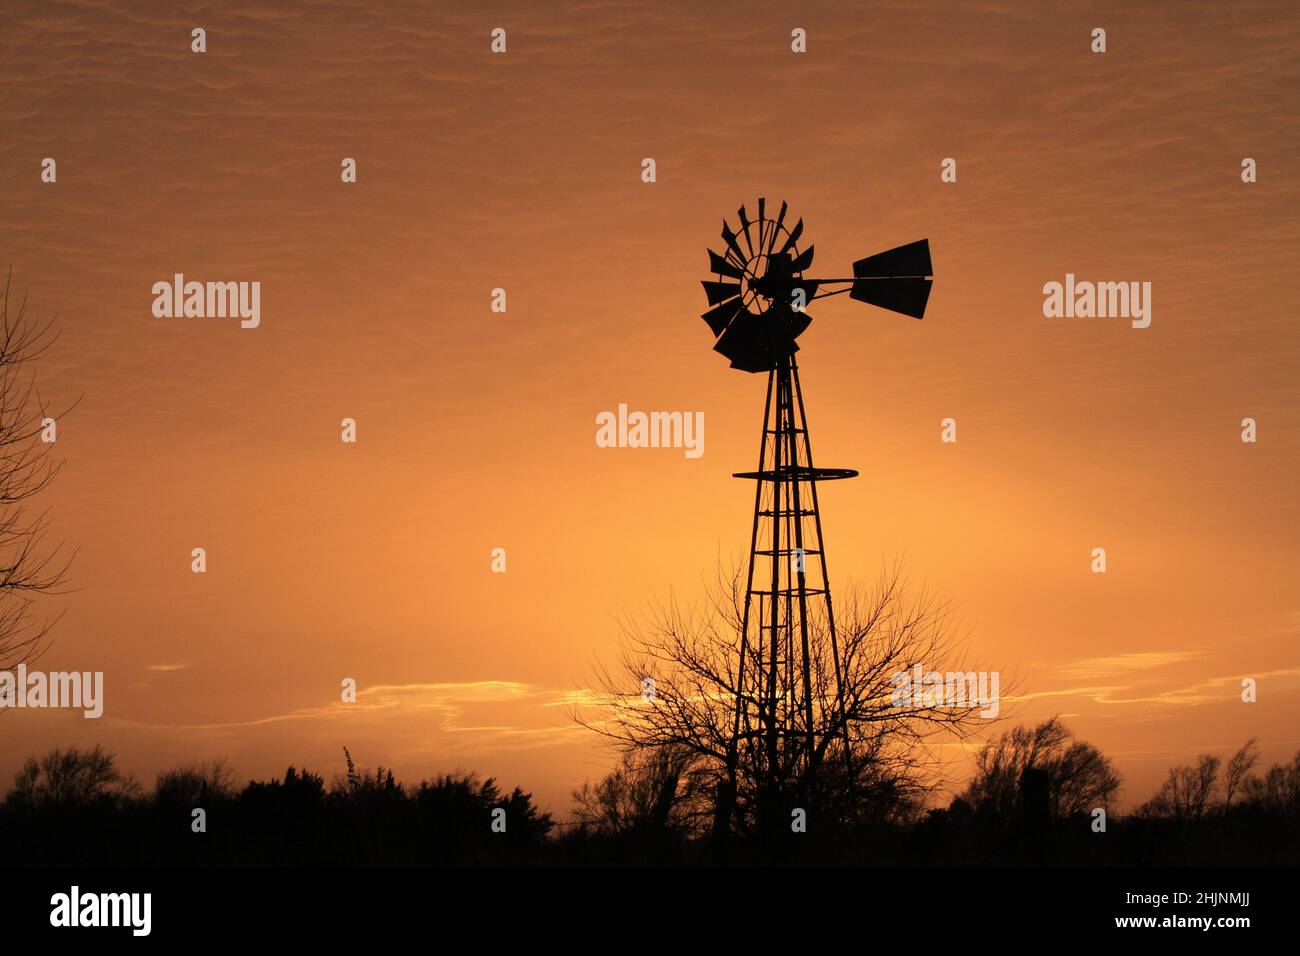 A Kansas colorful Sunset with a Golden sky and Windmill silhouette in a pasture out in the country Stock Photo